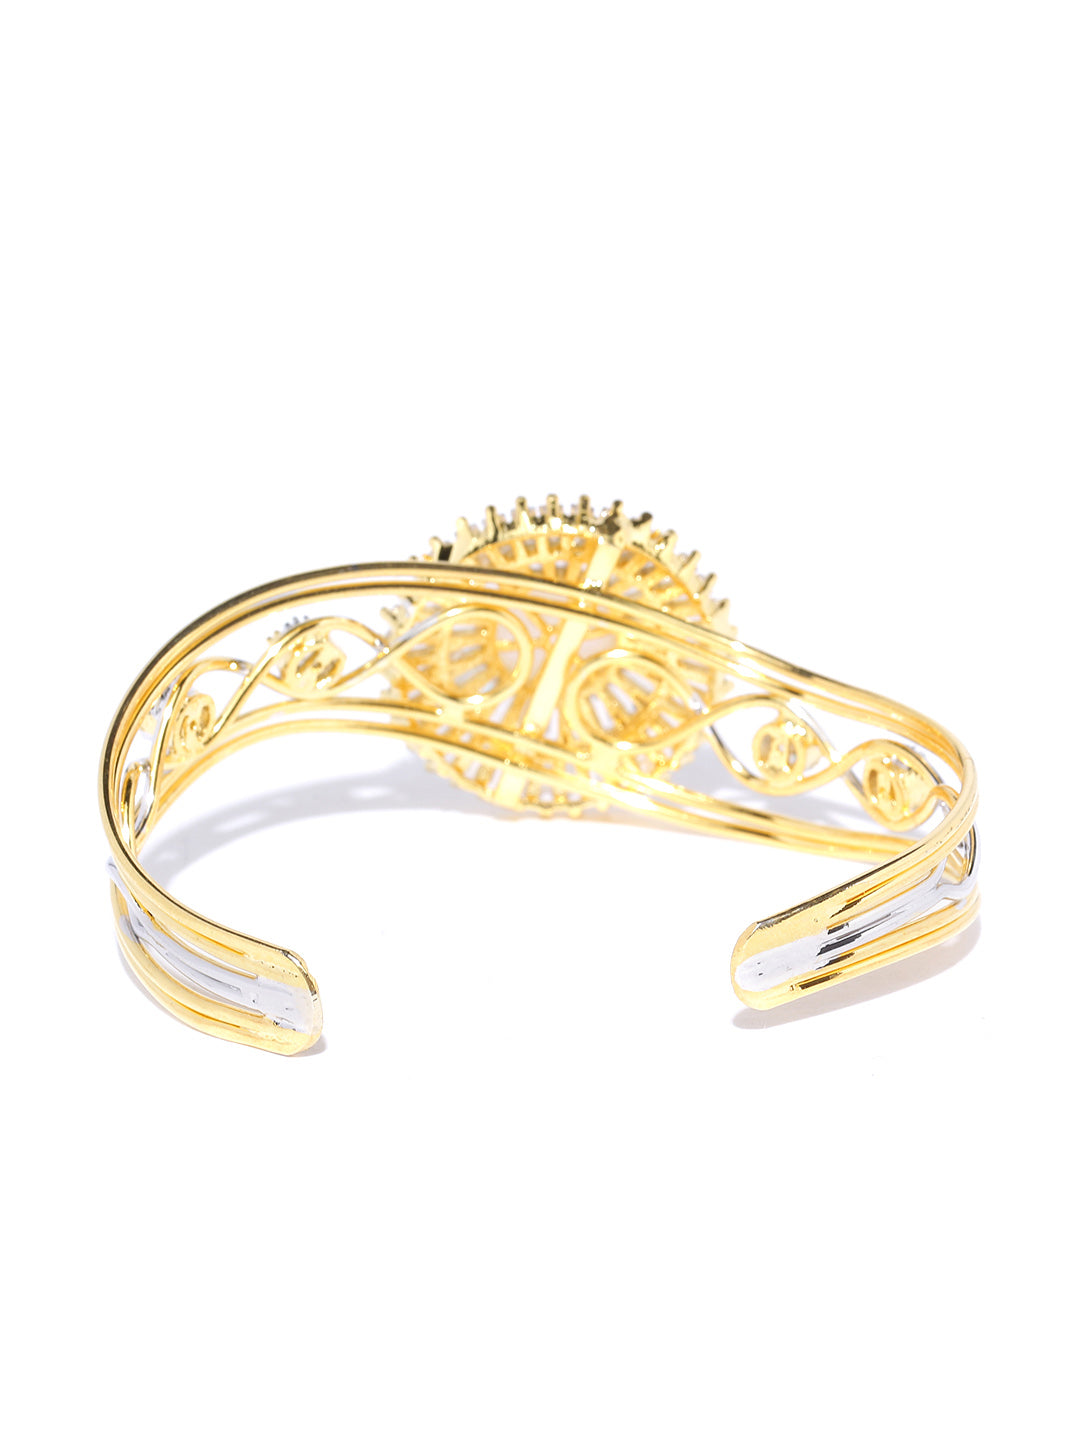 Gold-Plated American Diamond and Pearls Studded Cuff Bracelet in Floral Pattern